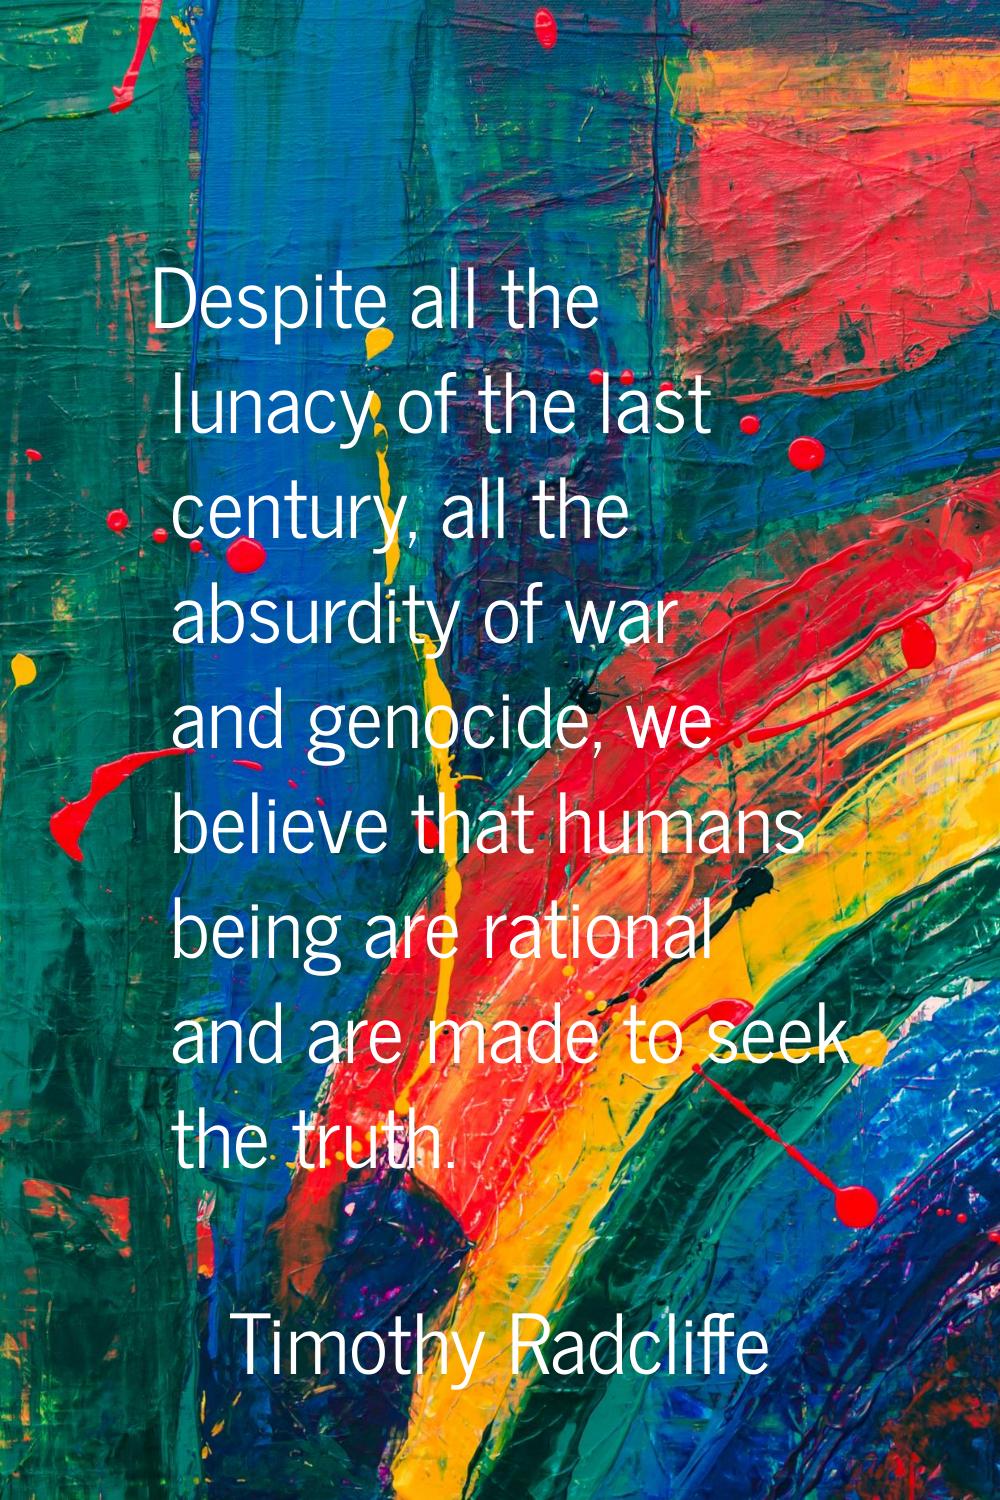 Despite all the lunacy of the last century, all the absurdity of war and genocide, we believe that 